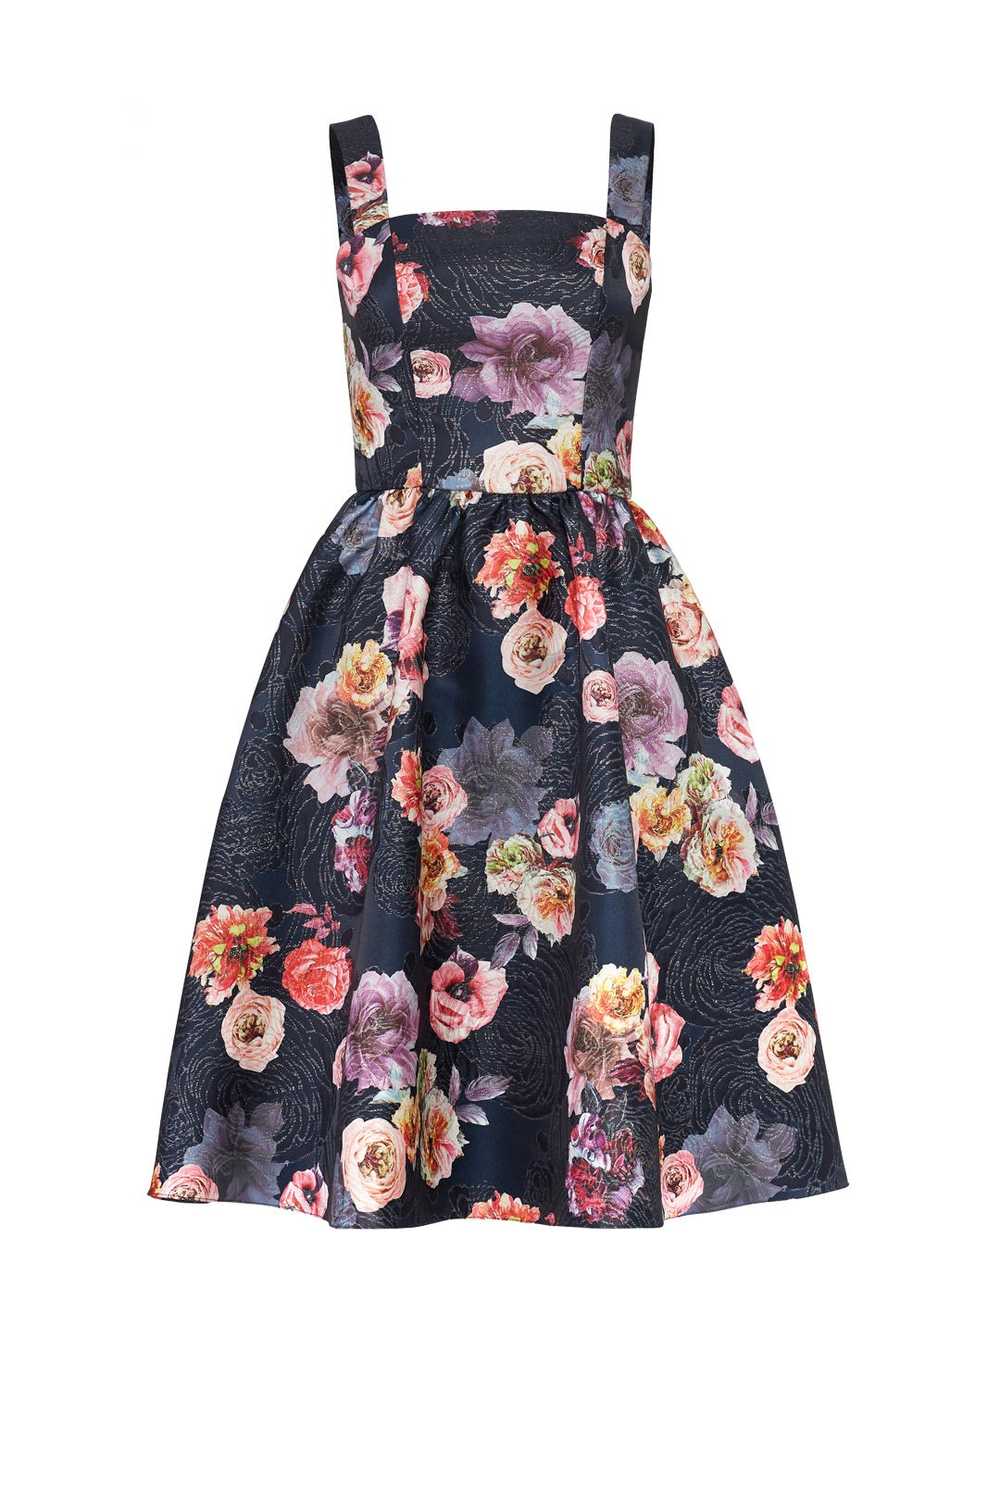 Christian Siriano Black Floral Cocktail Dress - image 5